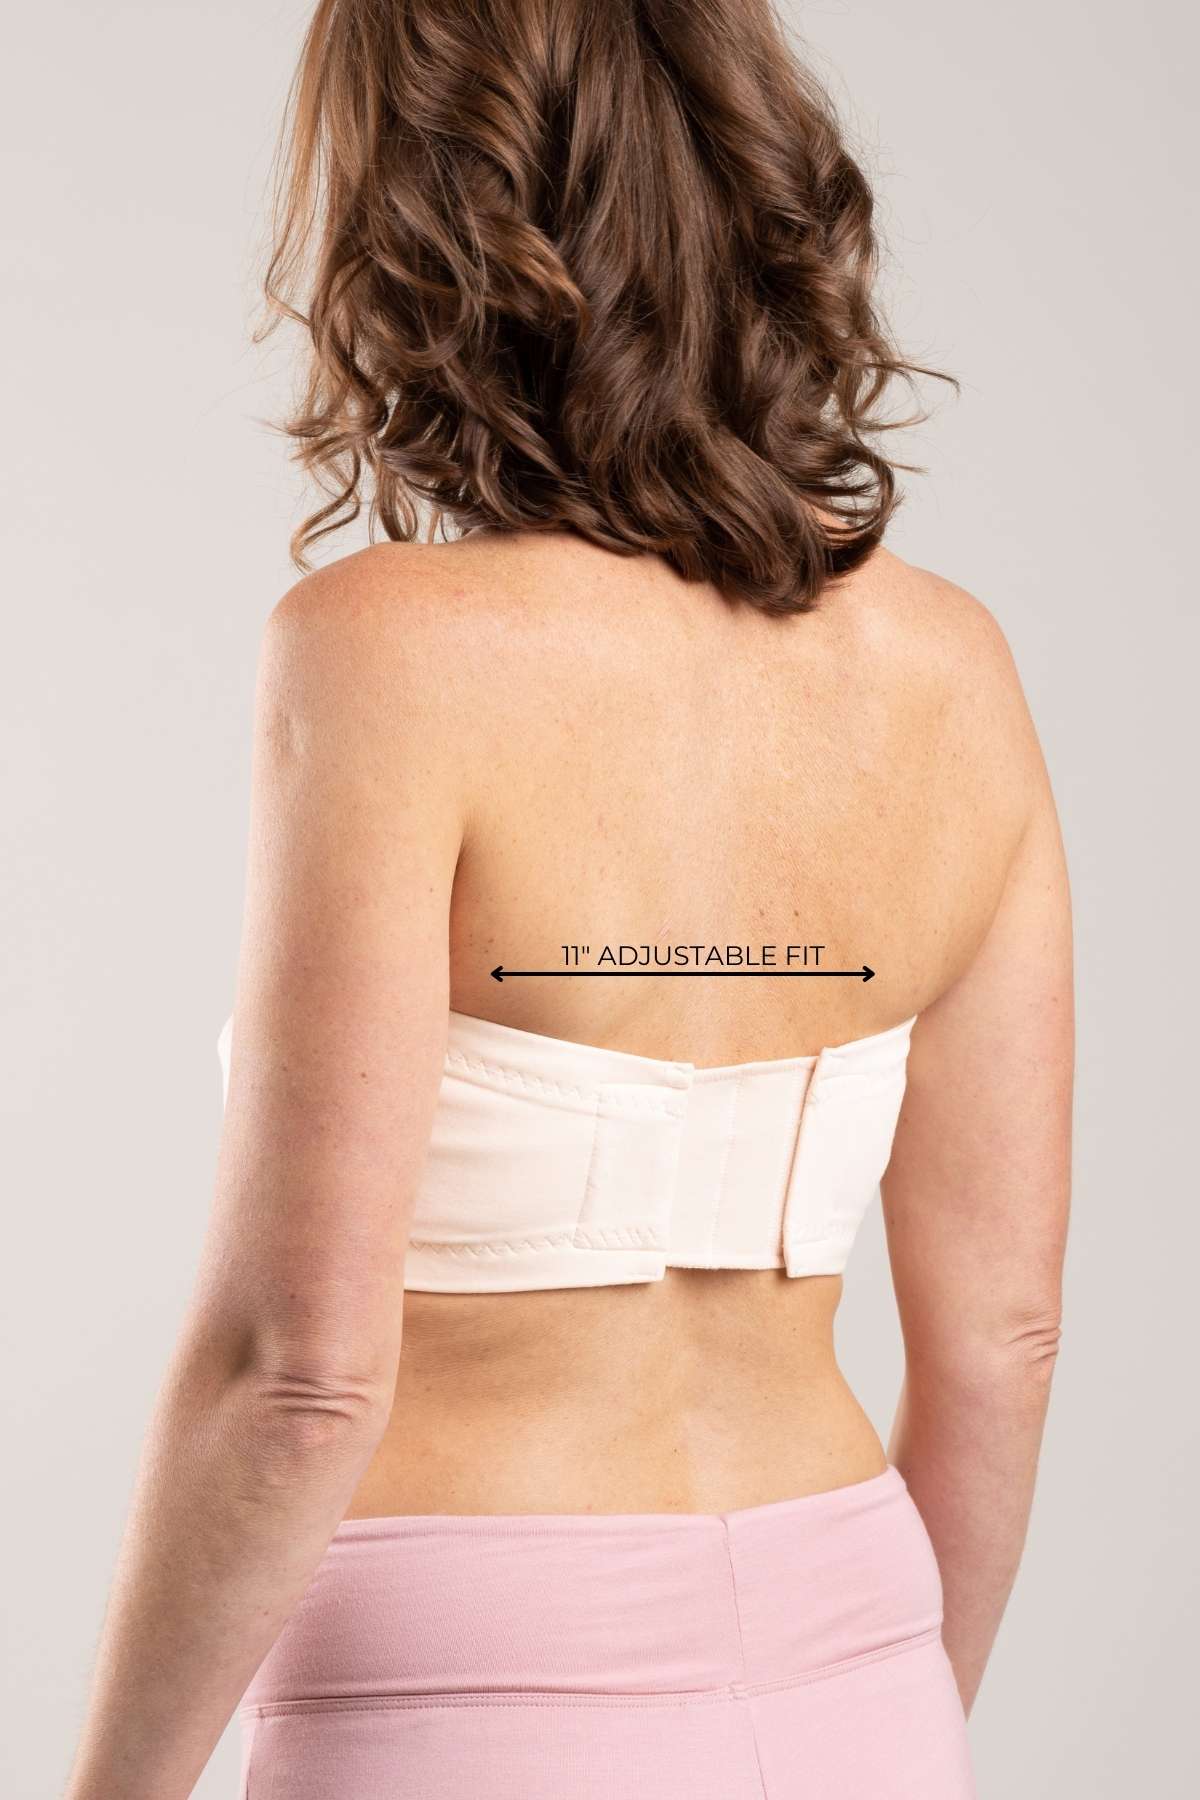 SALE! SuperMom Hands-Free Bra by Simple Wishes 50% OFF! – Special